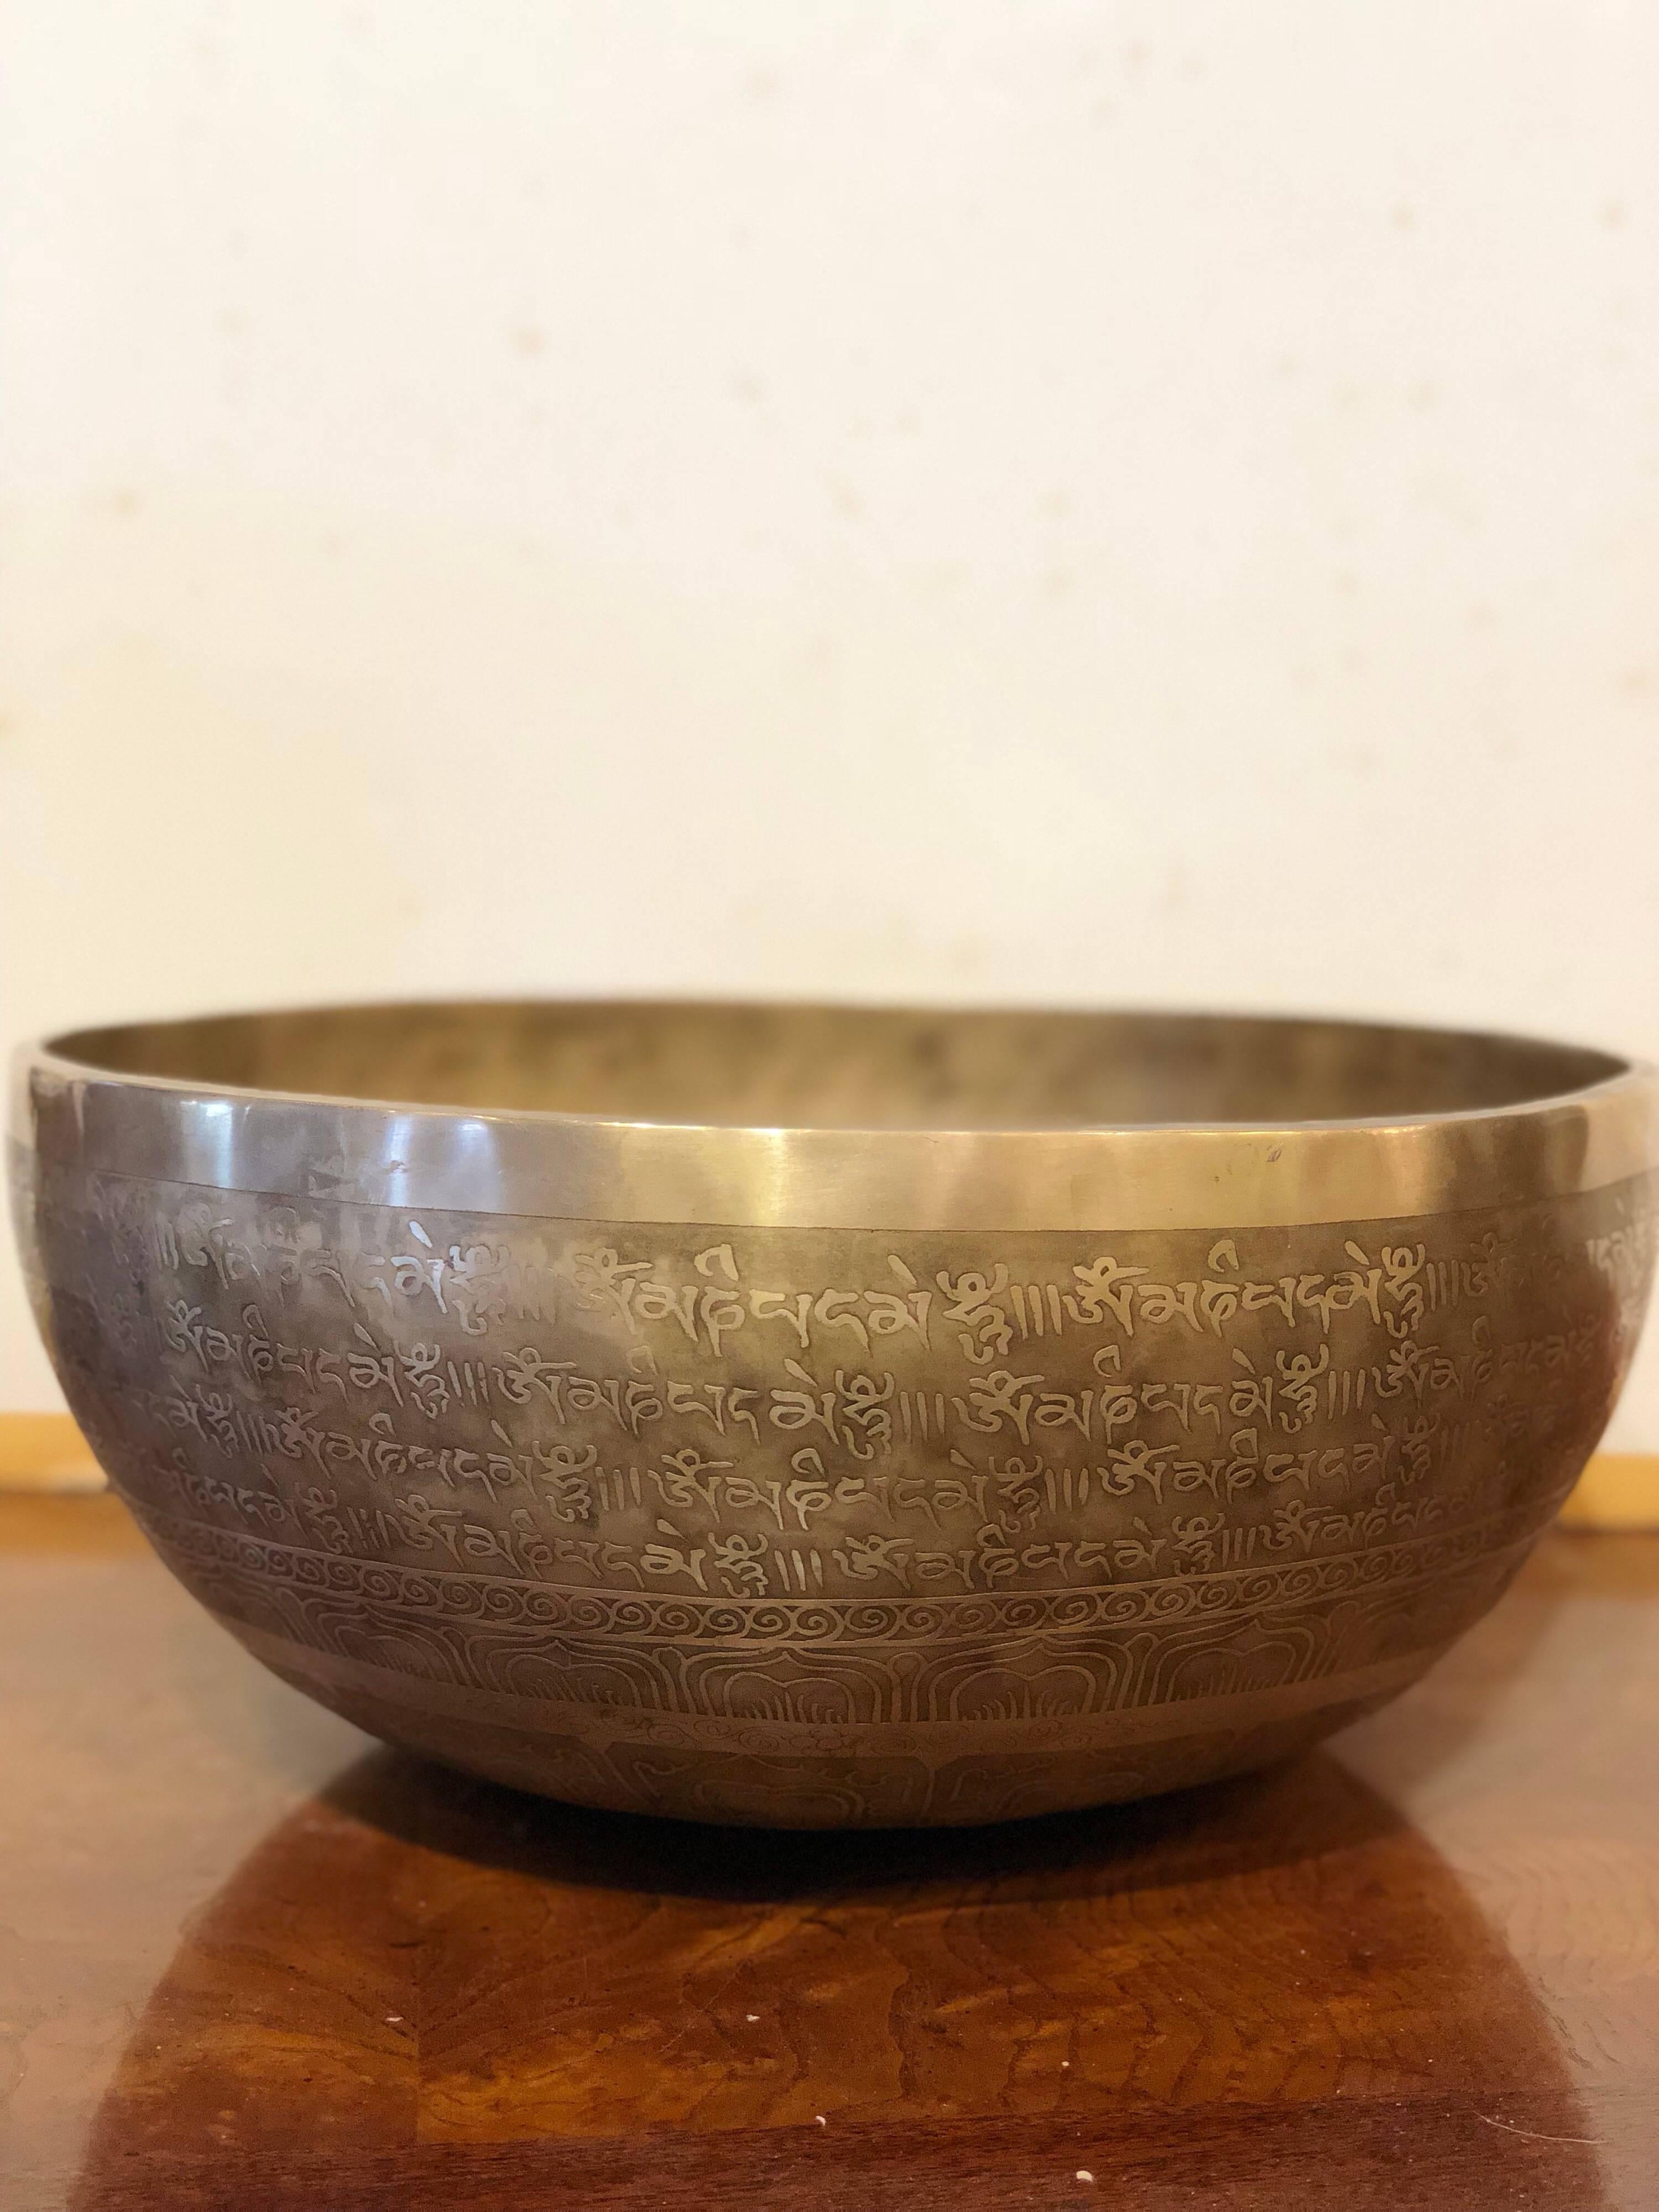 Struck bowls are used in some Buddhist religious practices to accompany periods of meditation and chanting. Struck and singing bowls are widely used for music making, meditation and relaxation, as well for personal spirituality. They have become